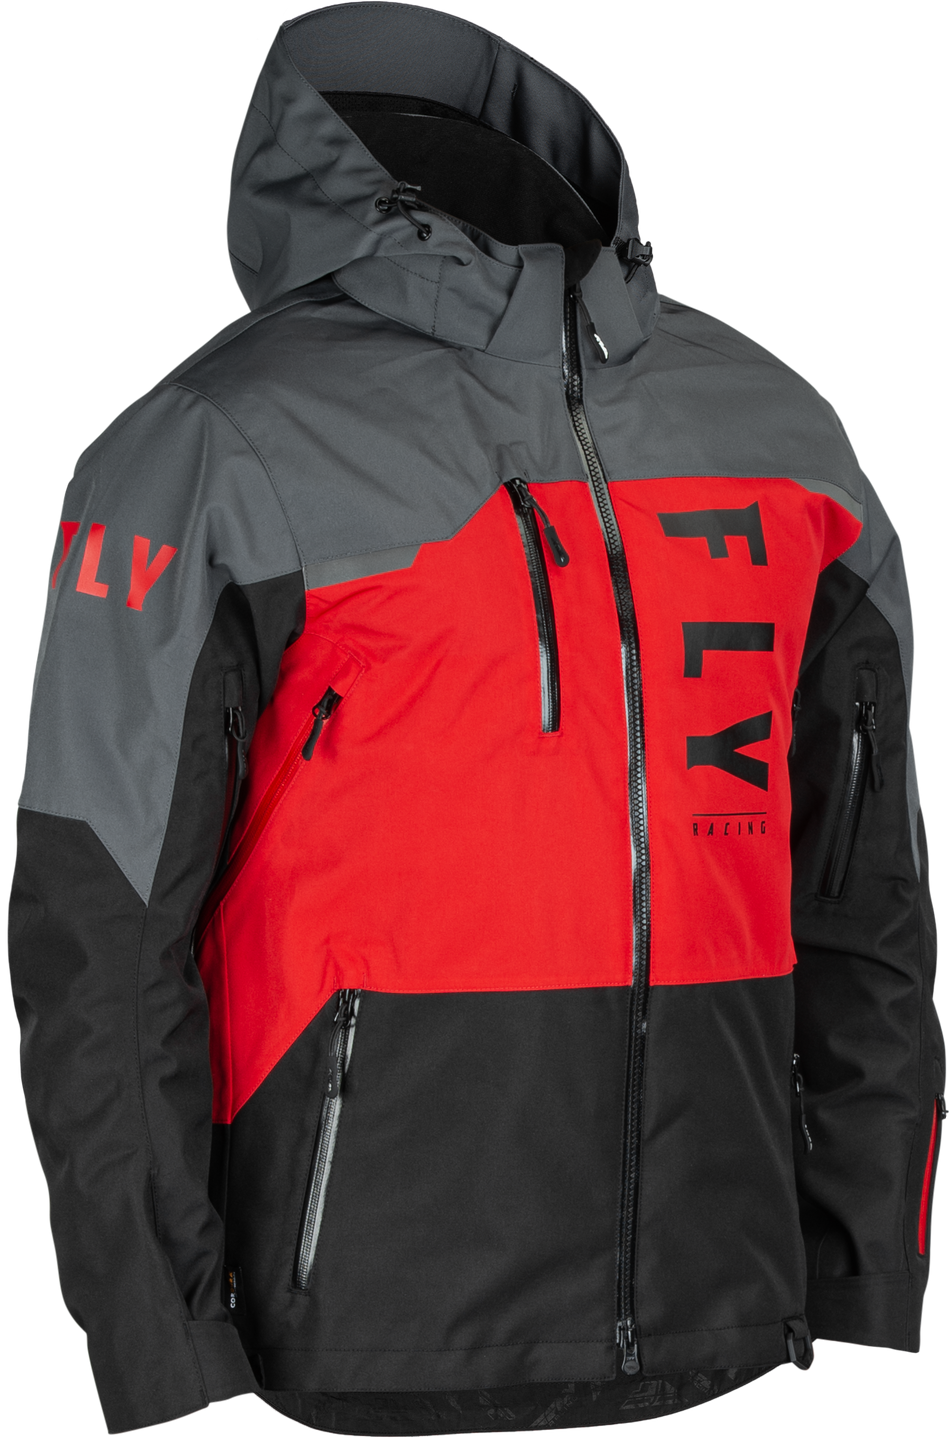 FLY RACING Carbon Jacket Black/Grey/Red Lg 470-5201L